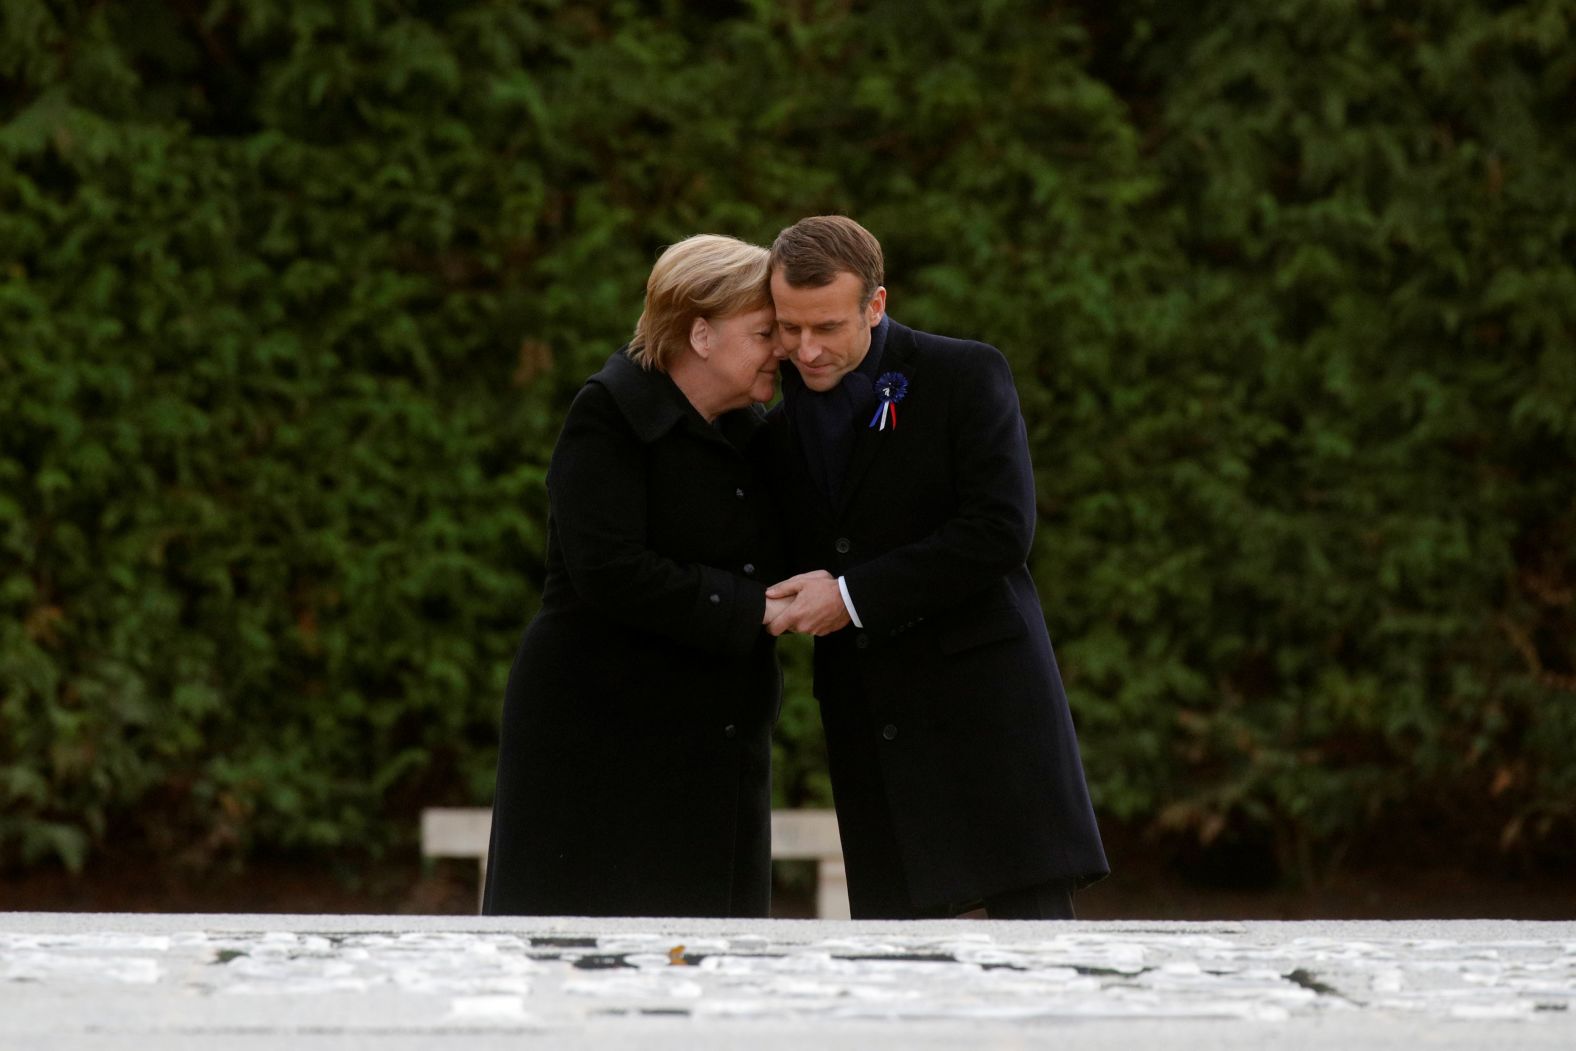 French President Emmanuel Macron and German Chancellor Angela Merkel hug after unveiling a plaque in the Clairiere of Rethondes during a commemoration ceremony on November 10 for Armistice Day, 100 years after the end of the First World War, in Compiegne, France.